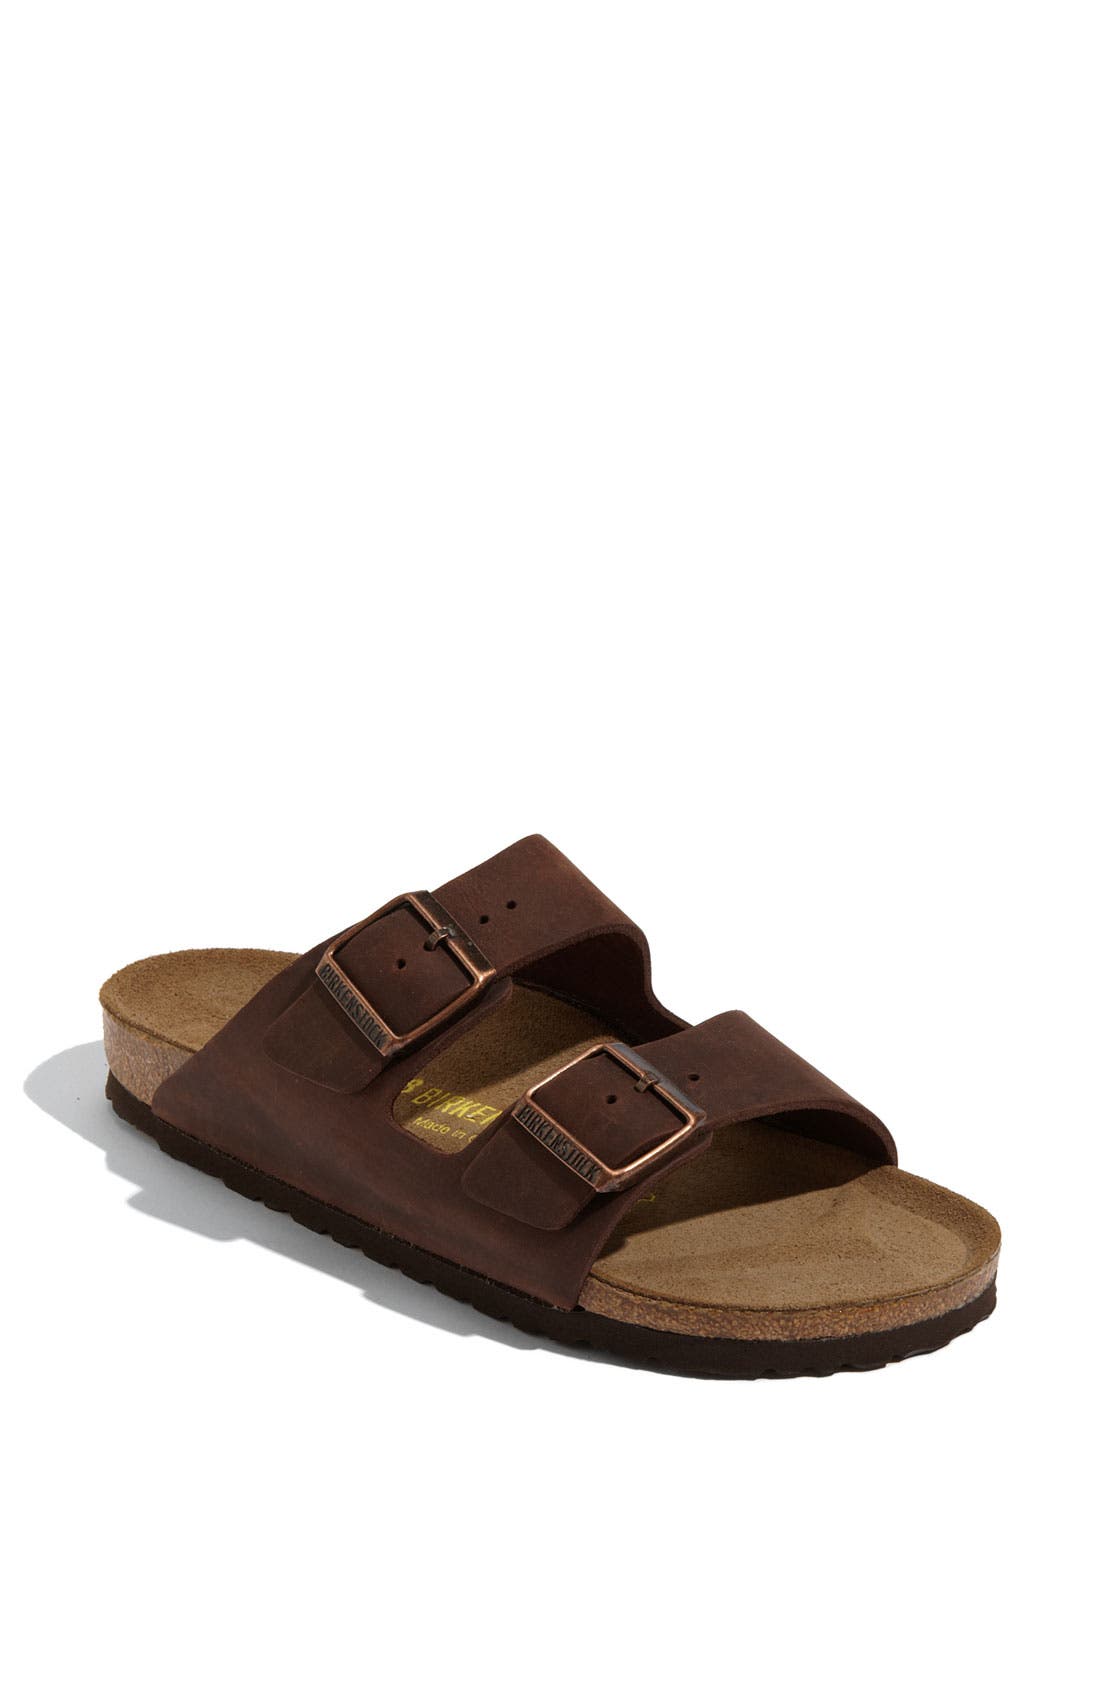 where can i find birkenstocks for cheap